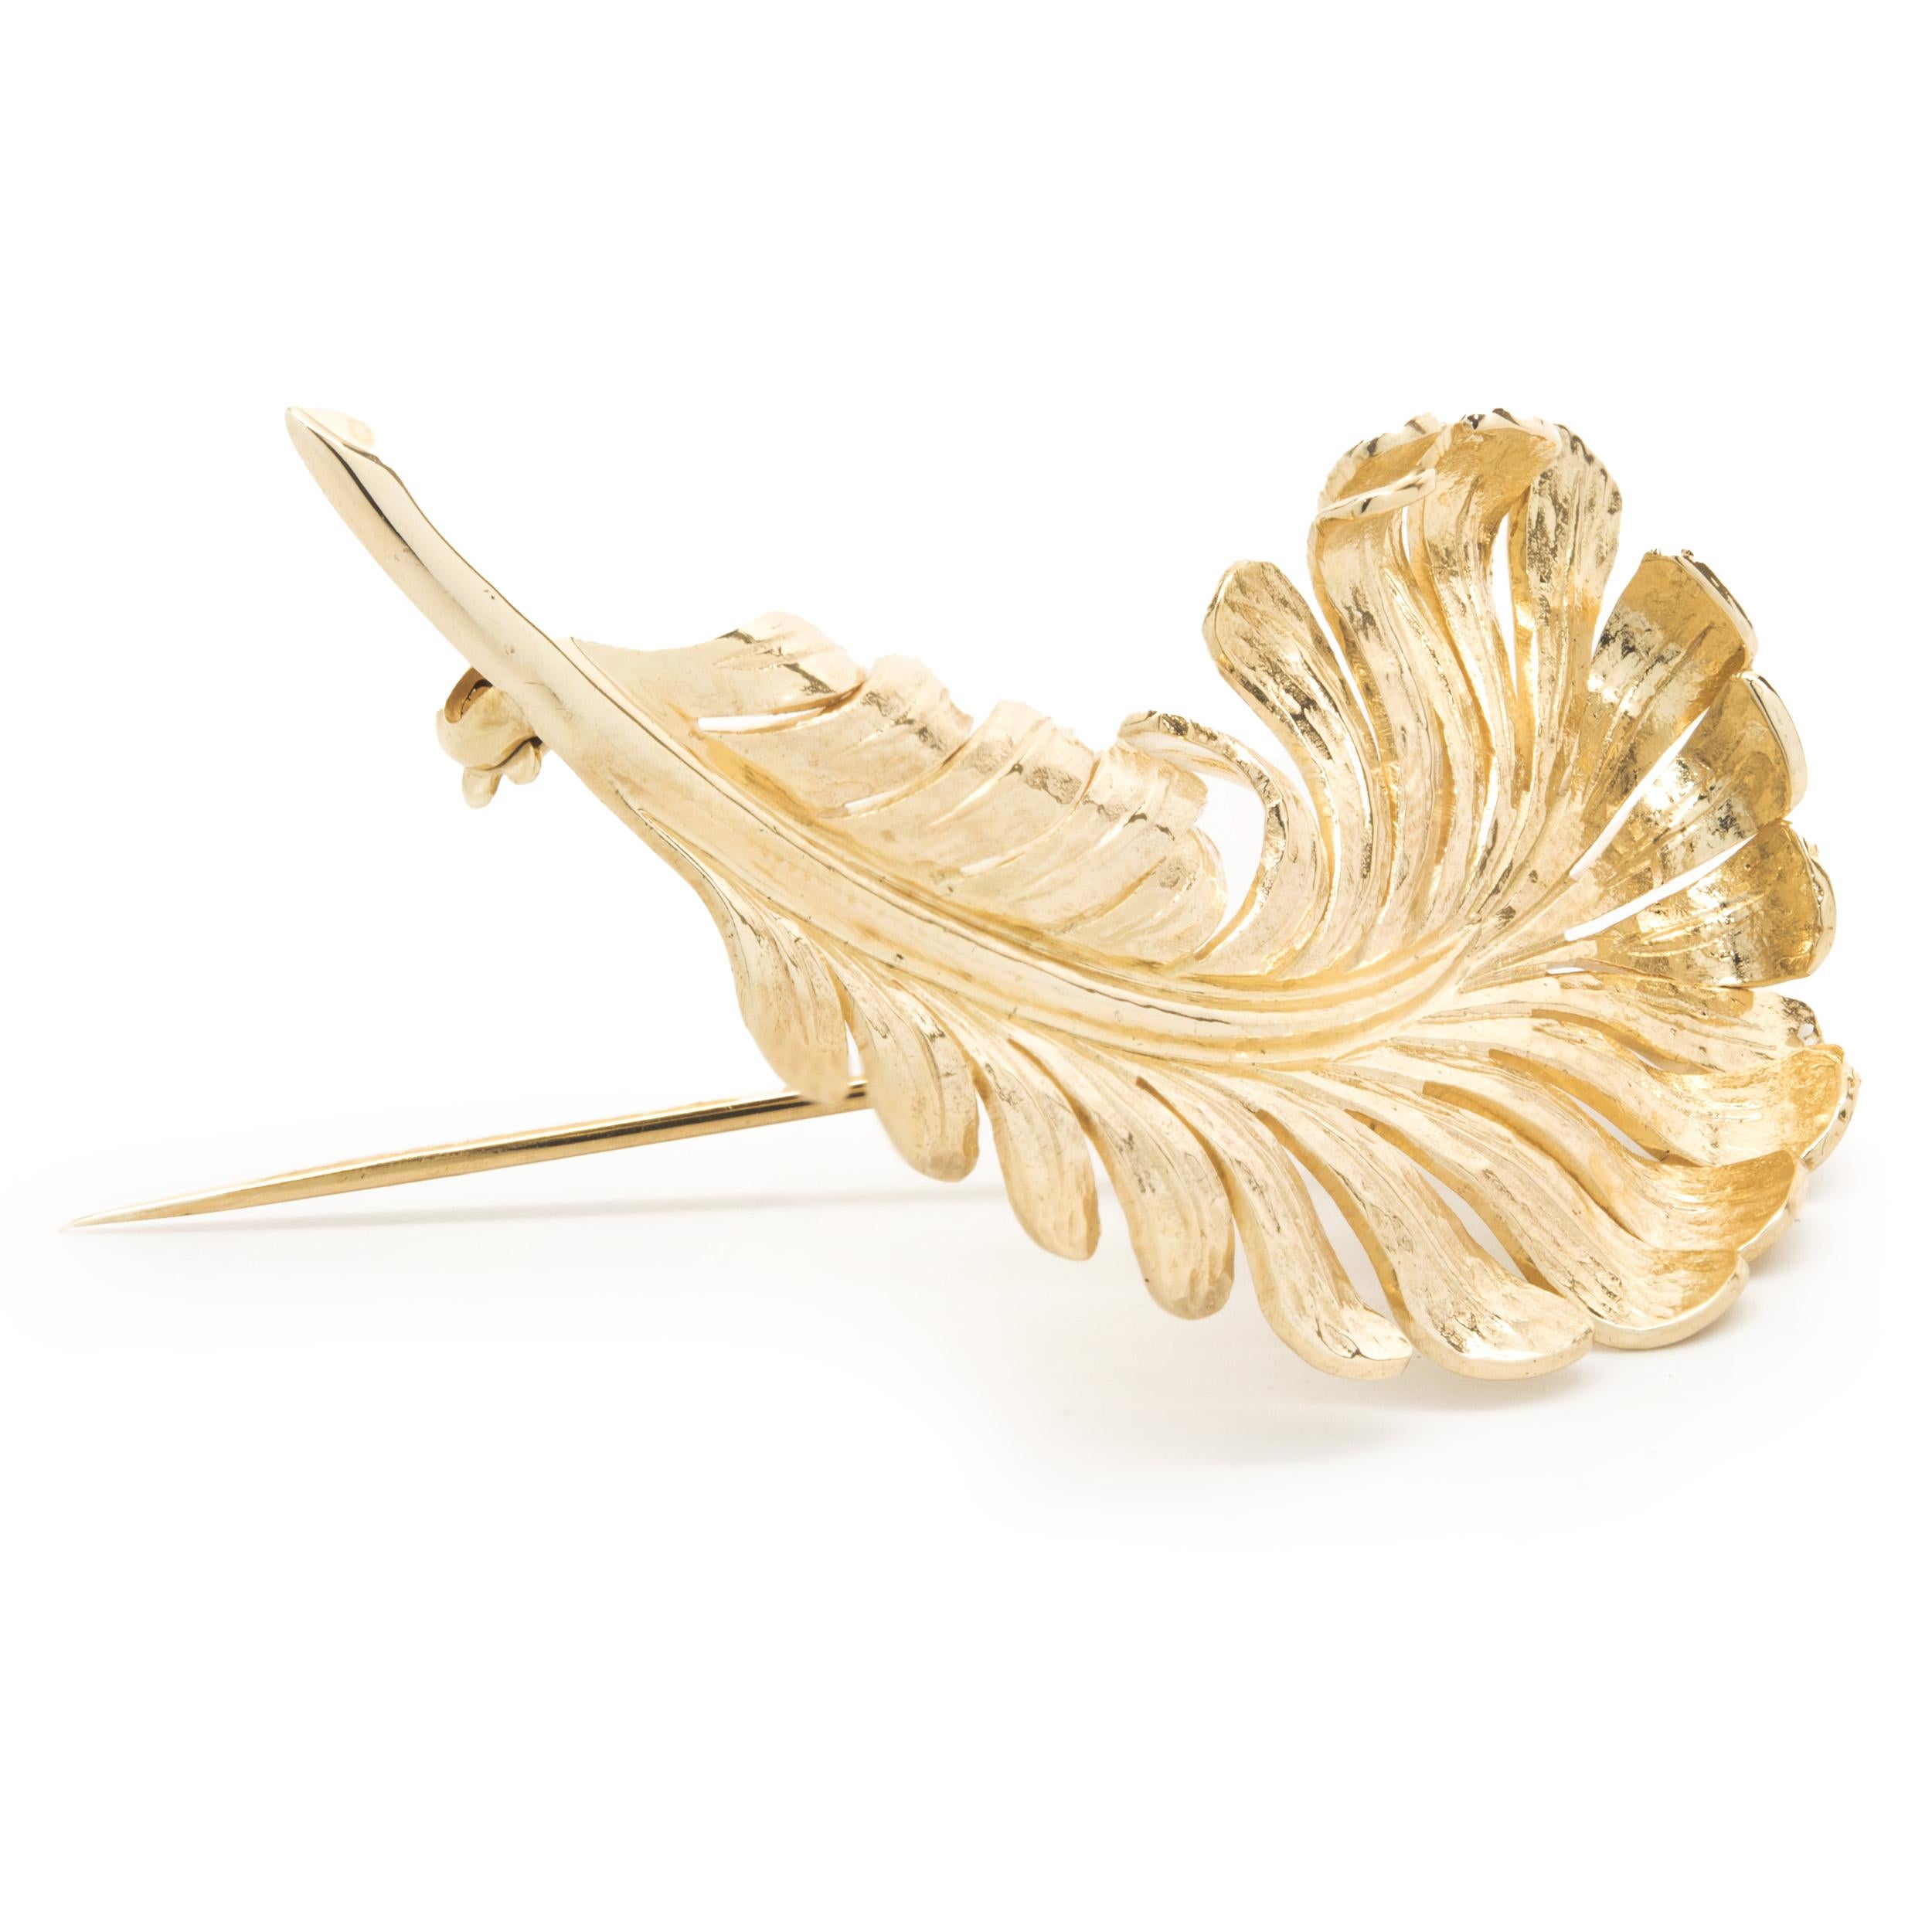 Designer: Tiffany & Co. 
Material: 14K yellow Gold 
Dimensions: feather measures 71 x 30mm
Weight: 15.67 grams
